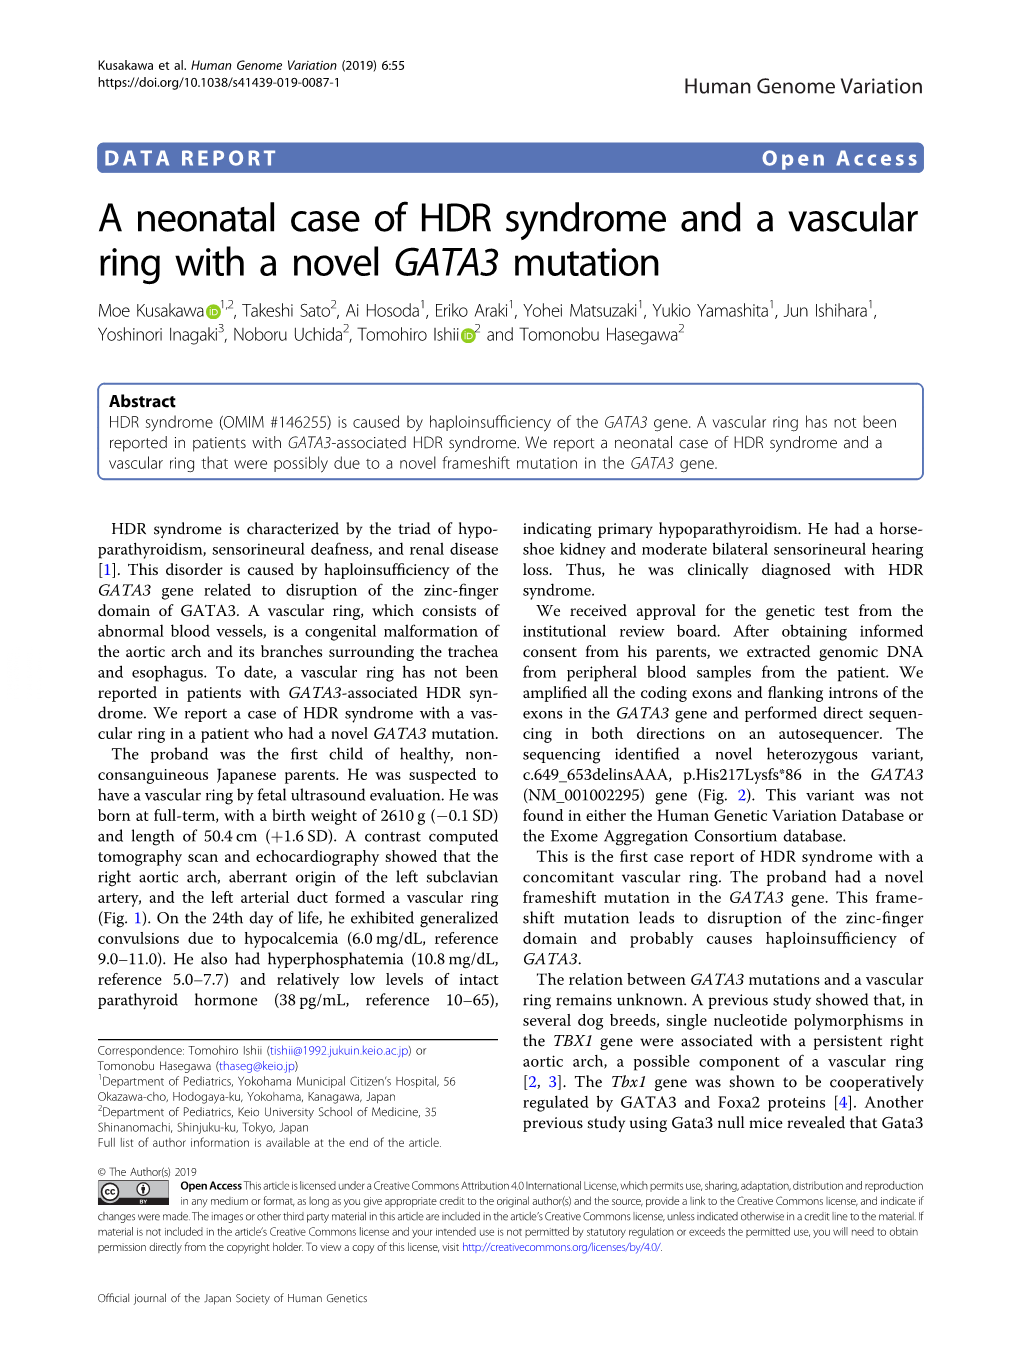 A Neonatal Case of HDR Syndrome and a Vascular Ring with a Novel